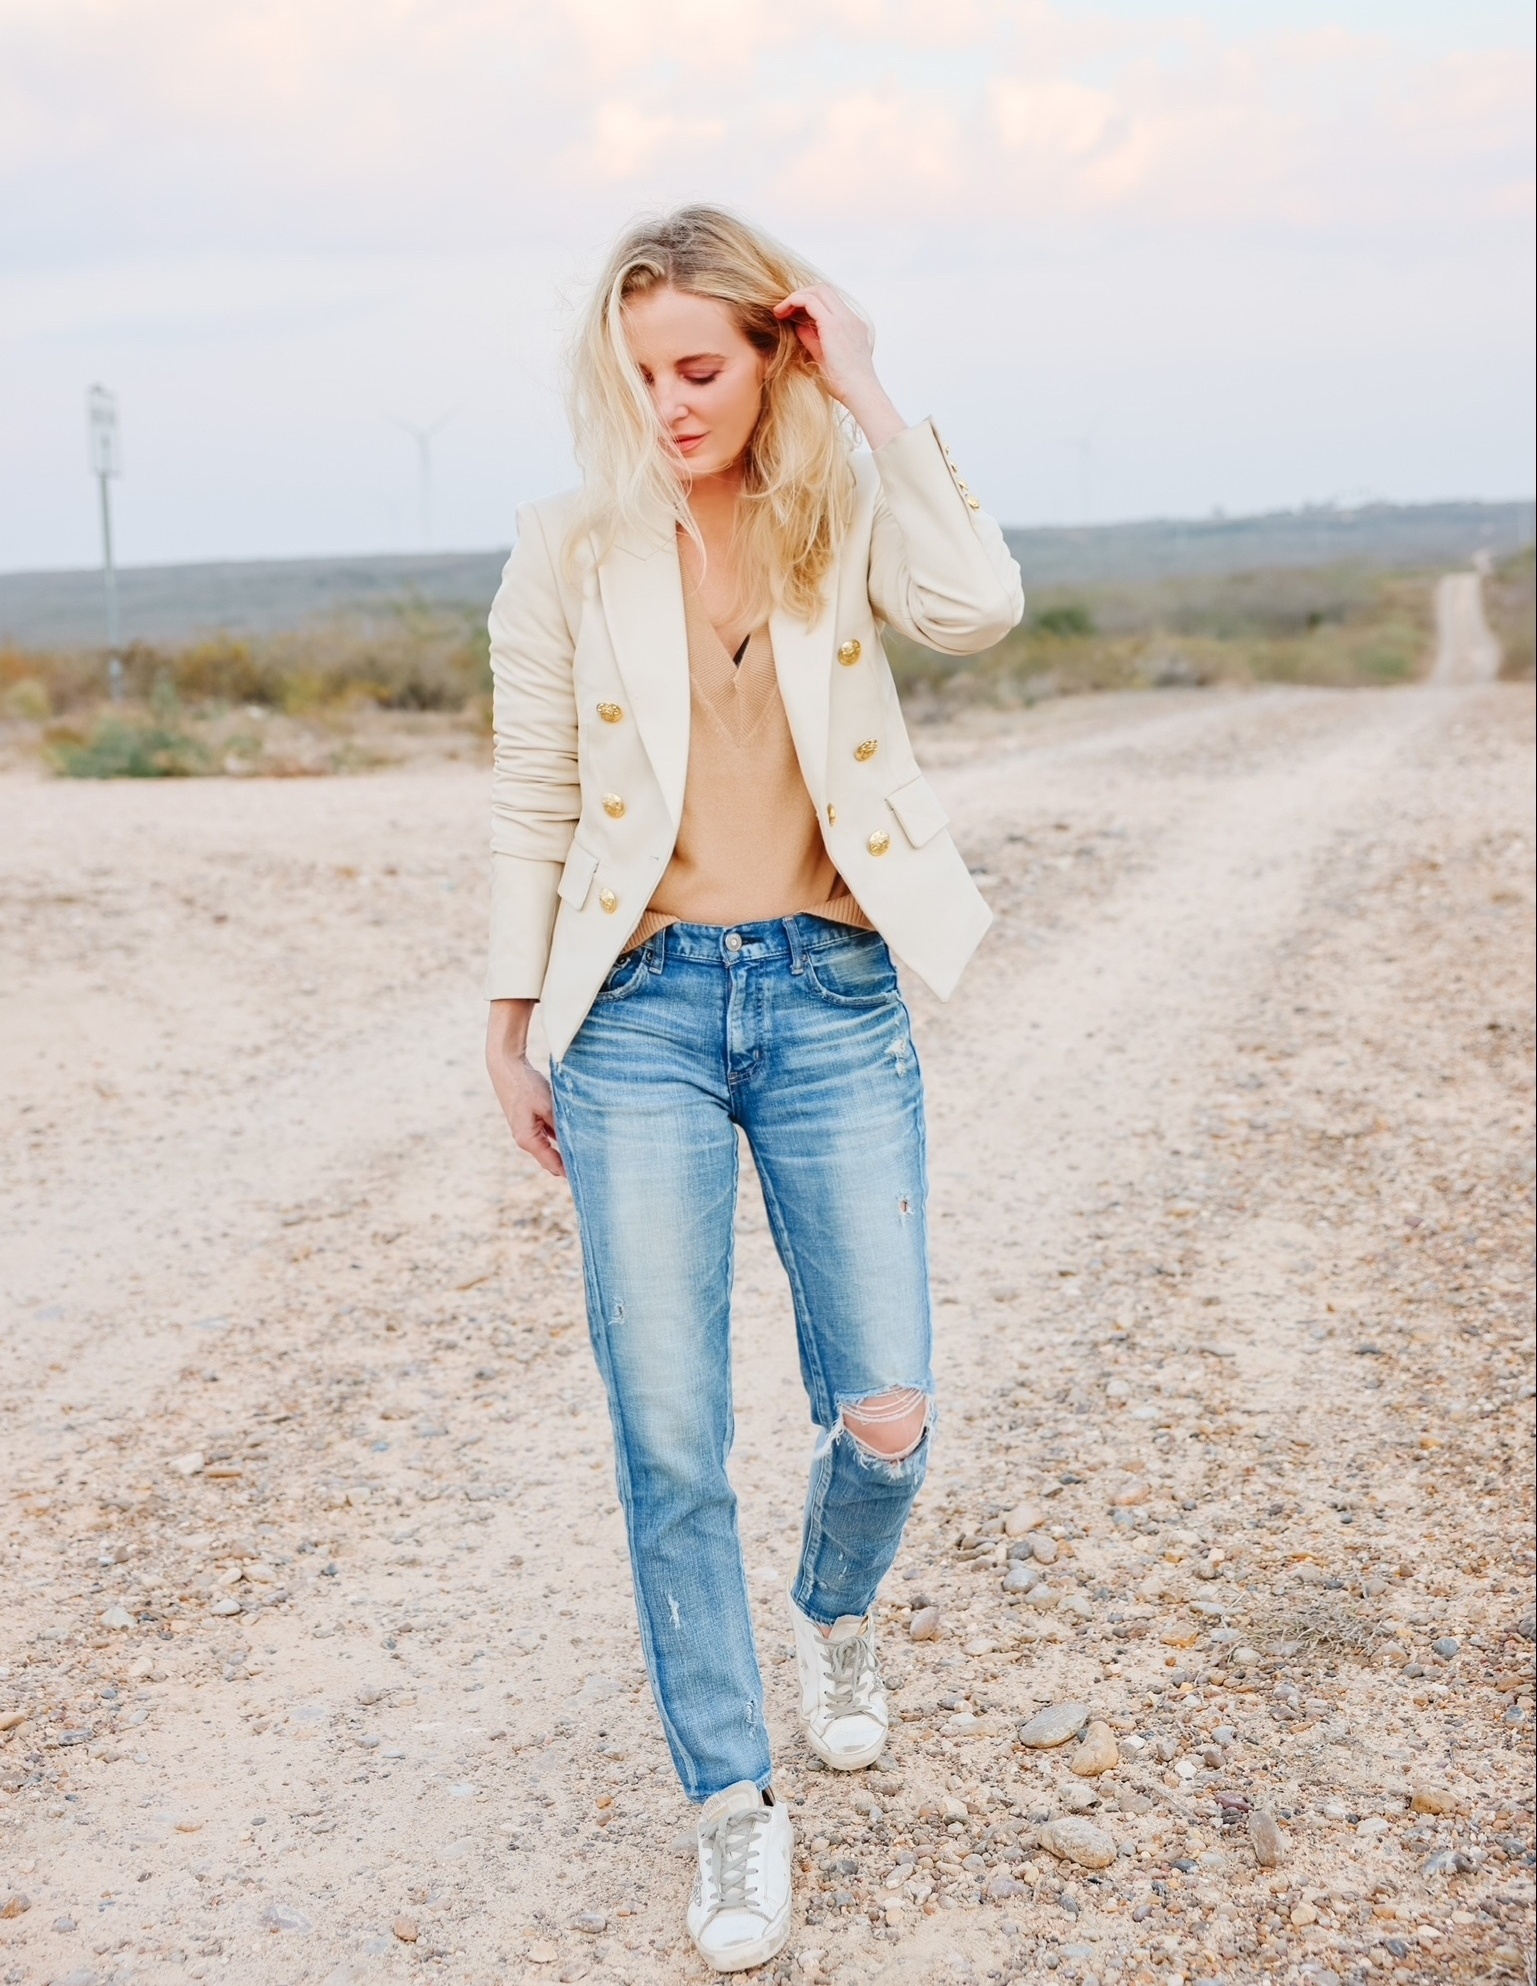 how to wear a blazer with jeans, Blazers on women over 40 featuring style over 40 influencer Erin Busbee wearing Veronica Beard cooke blazer in white with camel sweater and moussy jeans